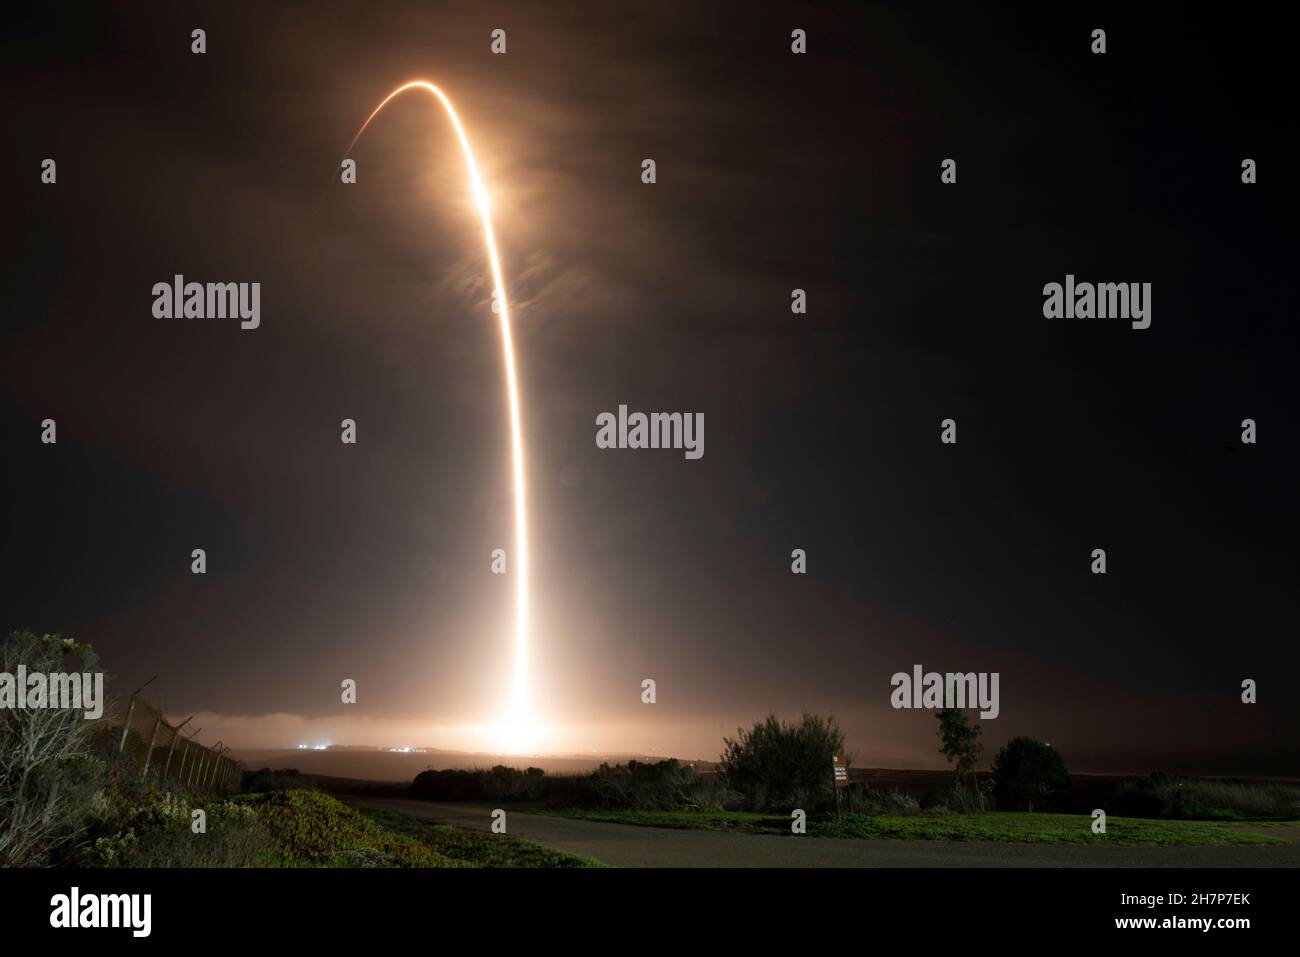 Vandenberg, United States Of America. 23rd Nov, 2021. Vandenberg, United States of America. 23 November, 2021. A SpaceX Falcon 9 booster rocket carrying the NASA planetary defense test mission, Double Asteroid Redirection Test, lifts off from Space Launch Complex-4 at Vandenberg Space Force Base November 24, 2021 in Vandenberg, California. The DART spacecraft is designed to crash into an asteroid while traveling at a speed of 15,000 miles per hour to alter the path to prevent impact on Earth. Credit: Michael Peterson/U.S. Space Force/Alamy Live News Stock Photo